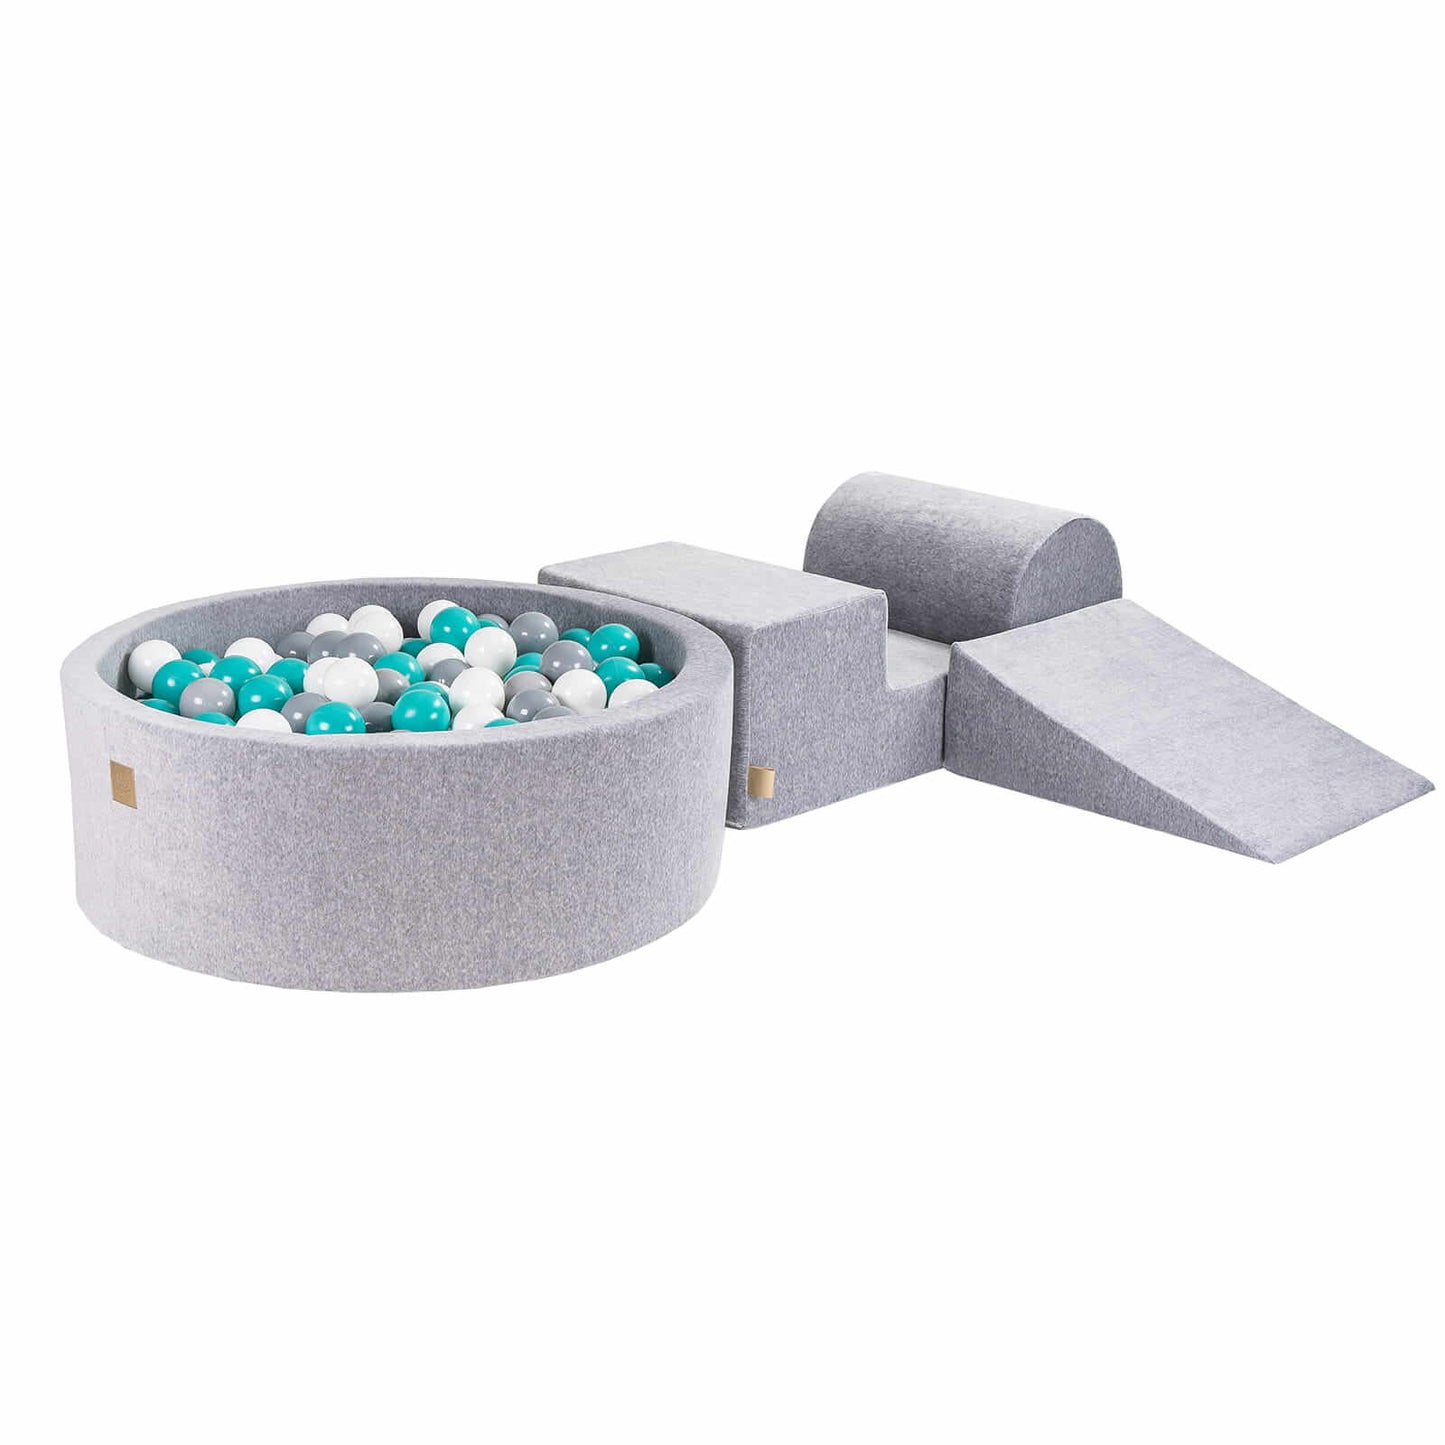 MeowBaby® Foam Play Set with Ball Pit + 200 Balls, Light Grey